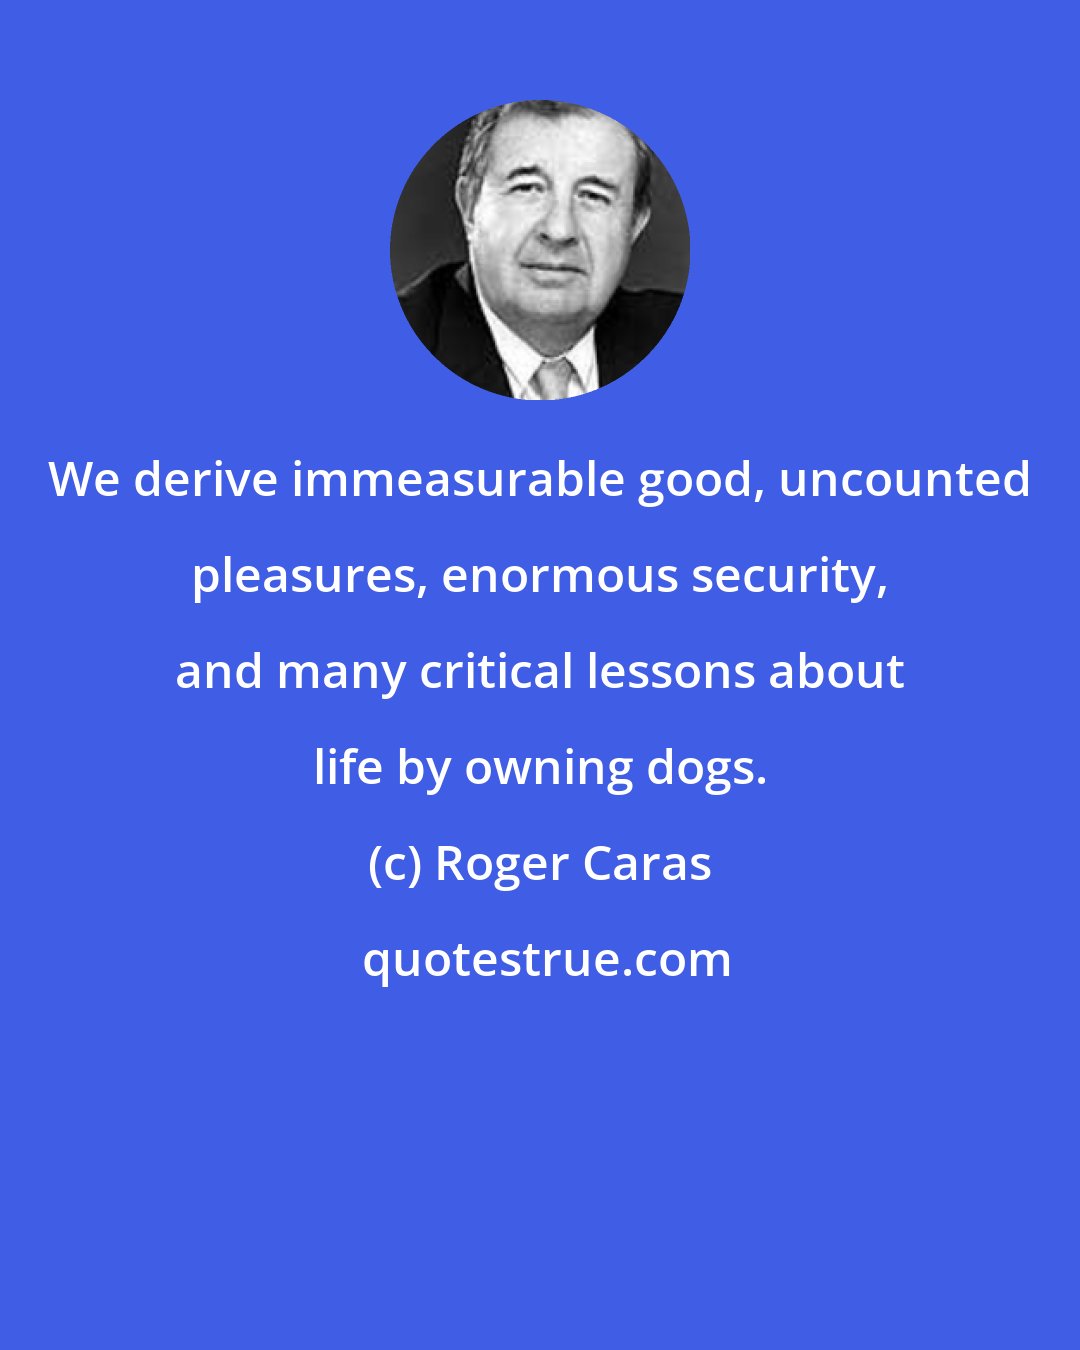 Roger Caras: We derive immeasurable good, uncounted pleasures, enormous security, and many critical lessons about life by owning dogs.